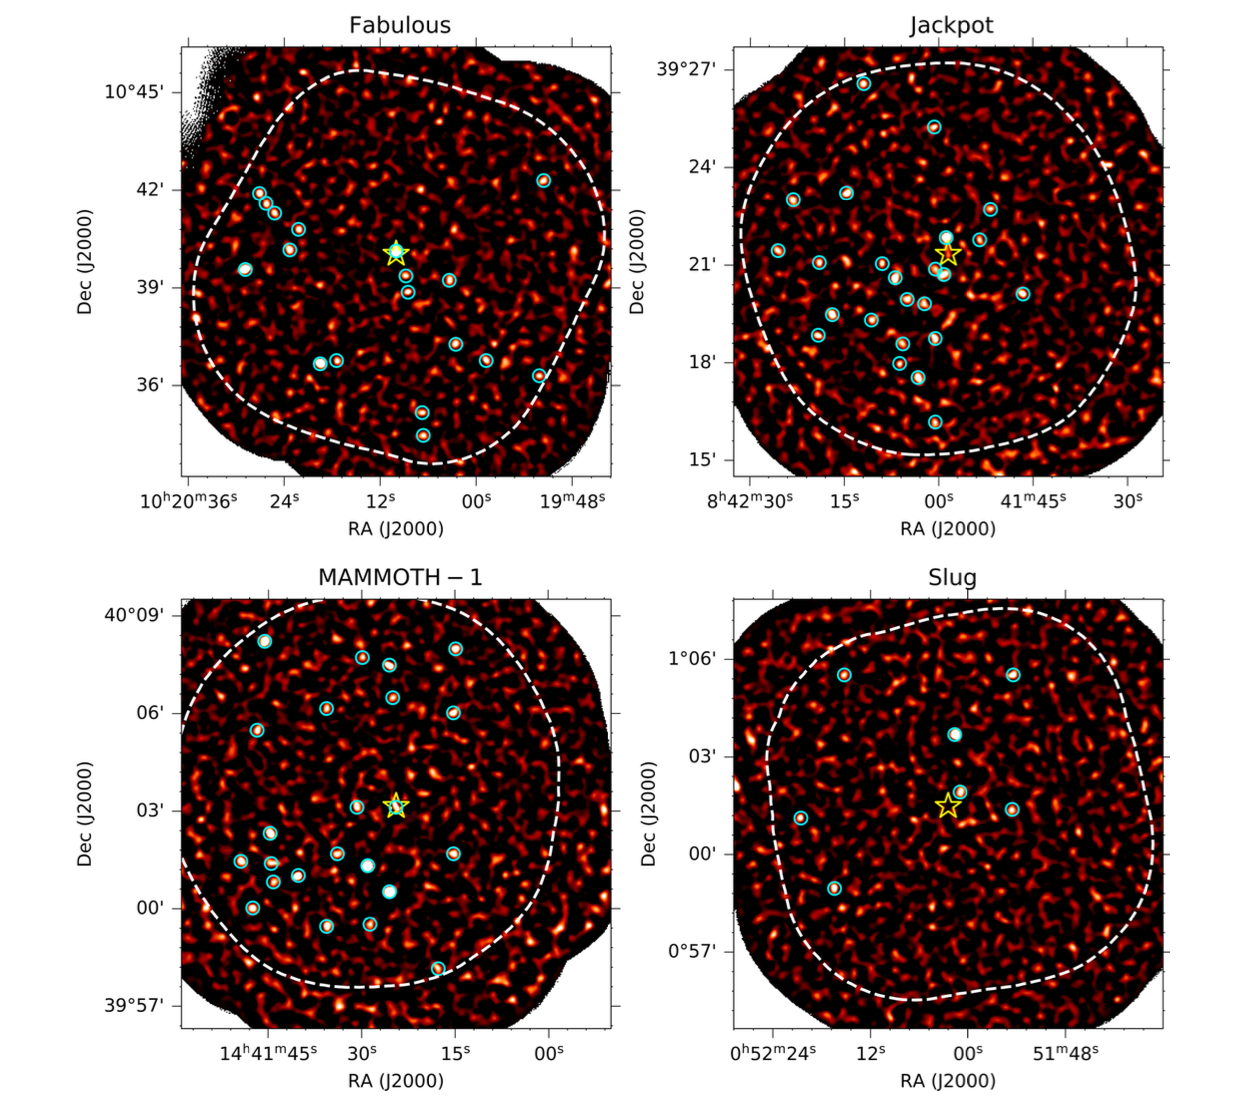 Four panel figure showing the dusty source detections around the central object for each ELAN field (Fabulous, Slug, MAMMOTH-1, and Jackpot). Each panel shows a clear over density of sources with about 10 sources detected